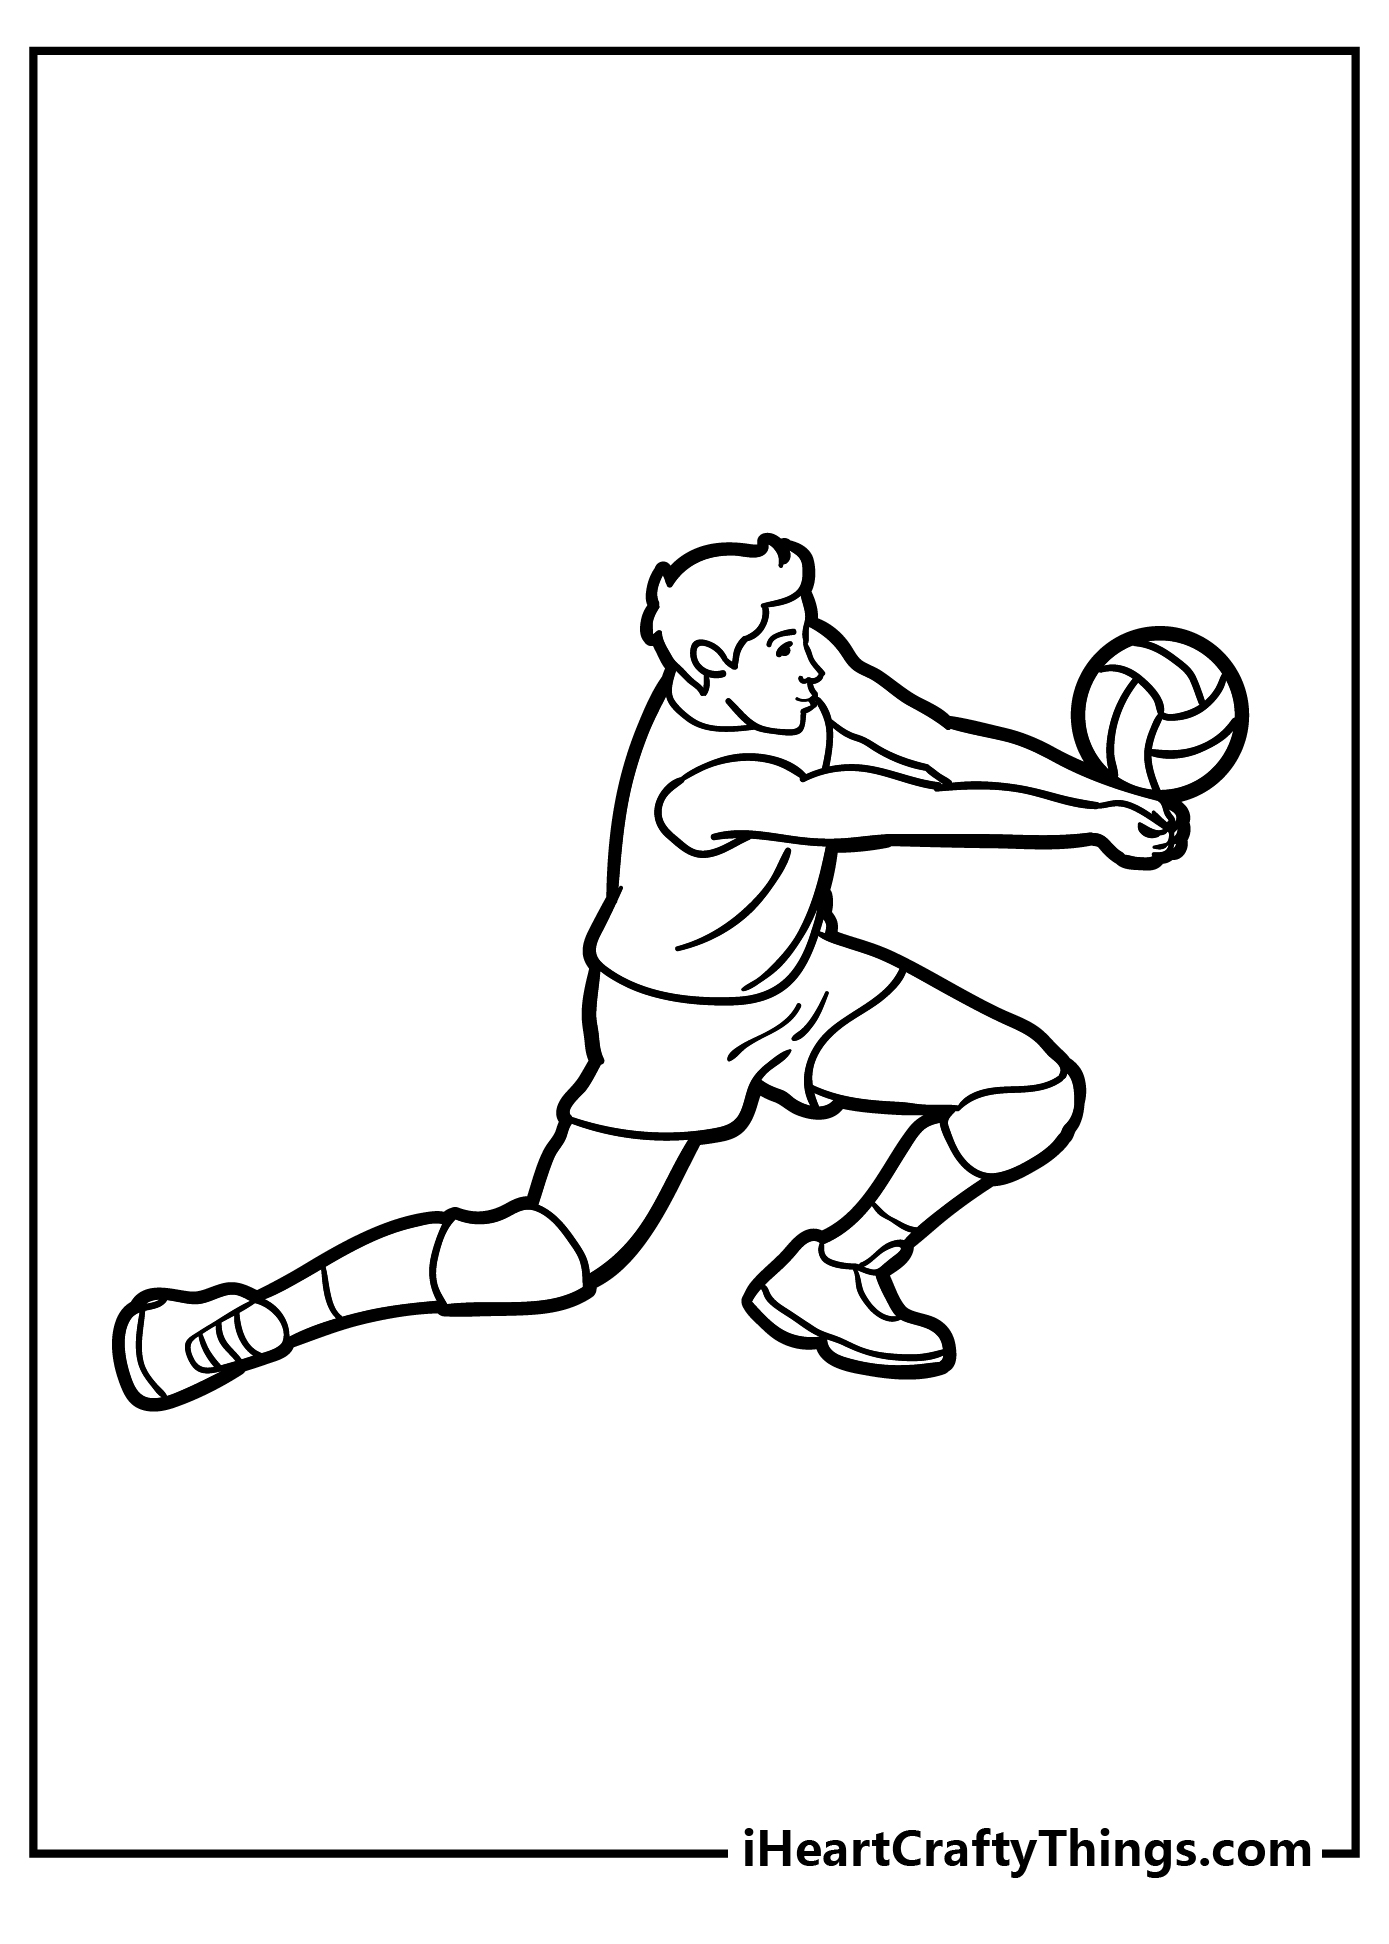 Volleyball Coloring Pages for kids free download